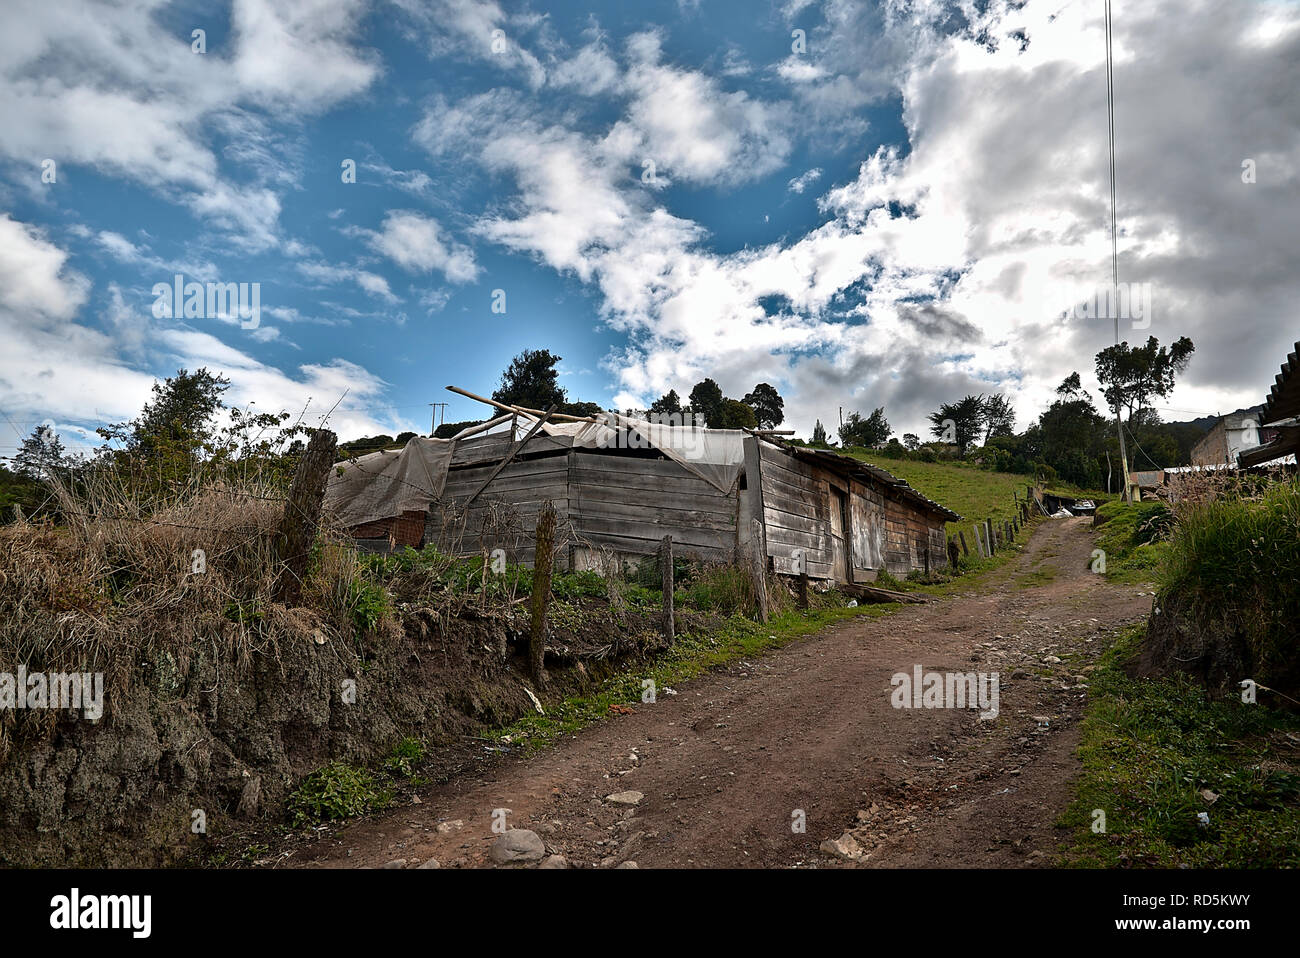 Country Landscape in Nariño Colombia Stock Photo